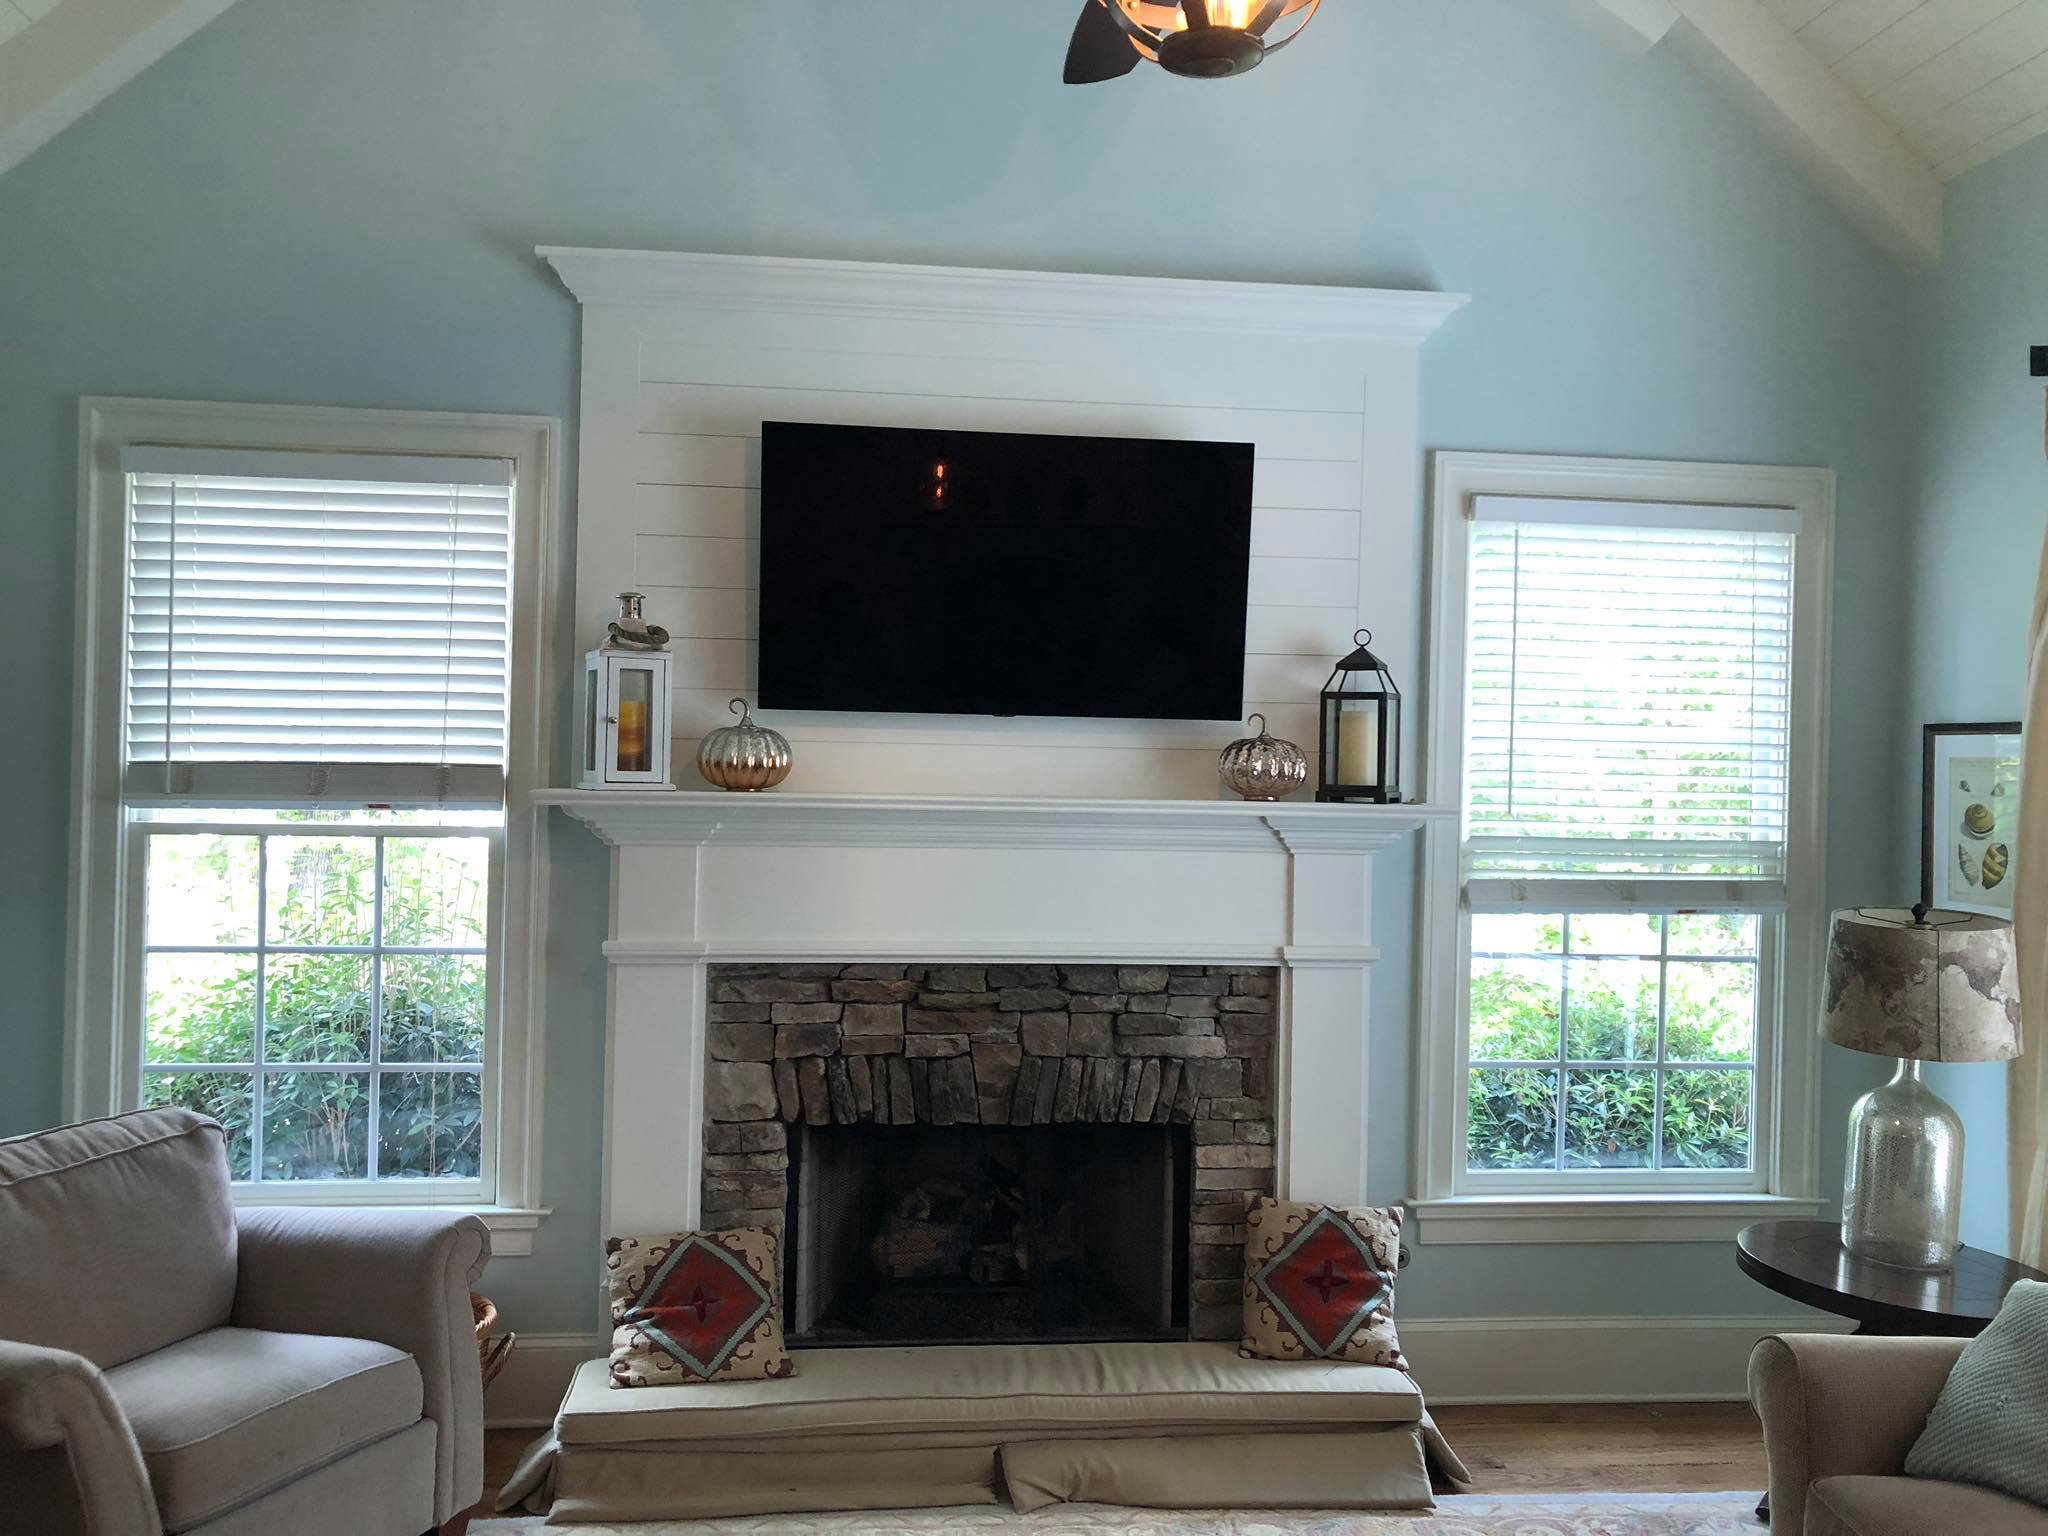 Fireplace Mantel and Trim Painted White 3